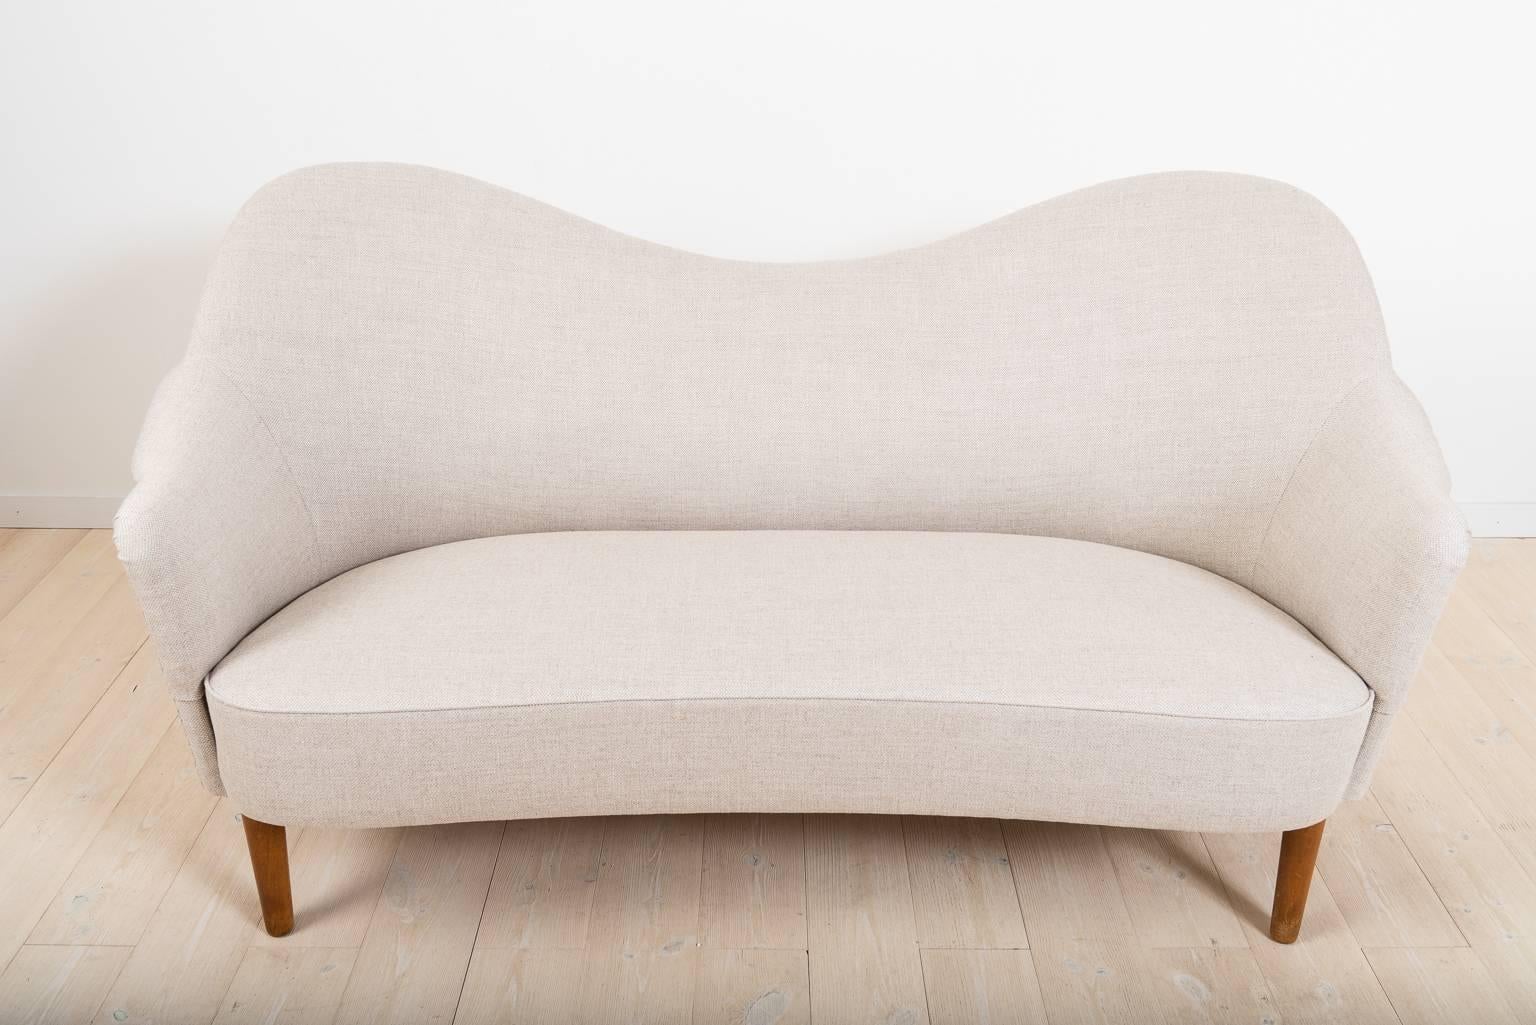 The model was designed 1956. The sofa has a completely renovated padding in traditional natural materials - no foam rubber has been used and new fabric.